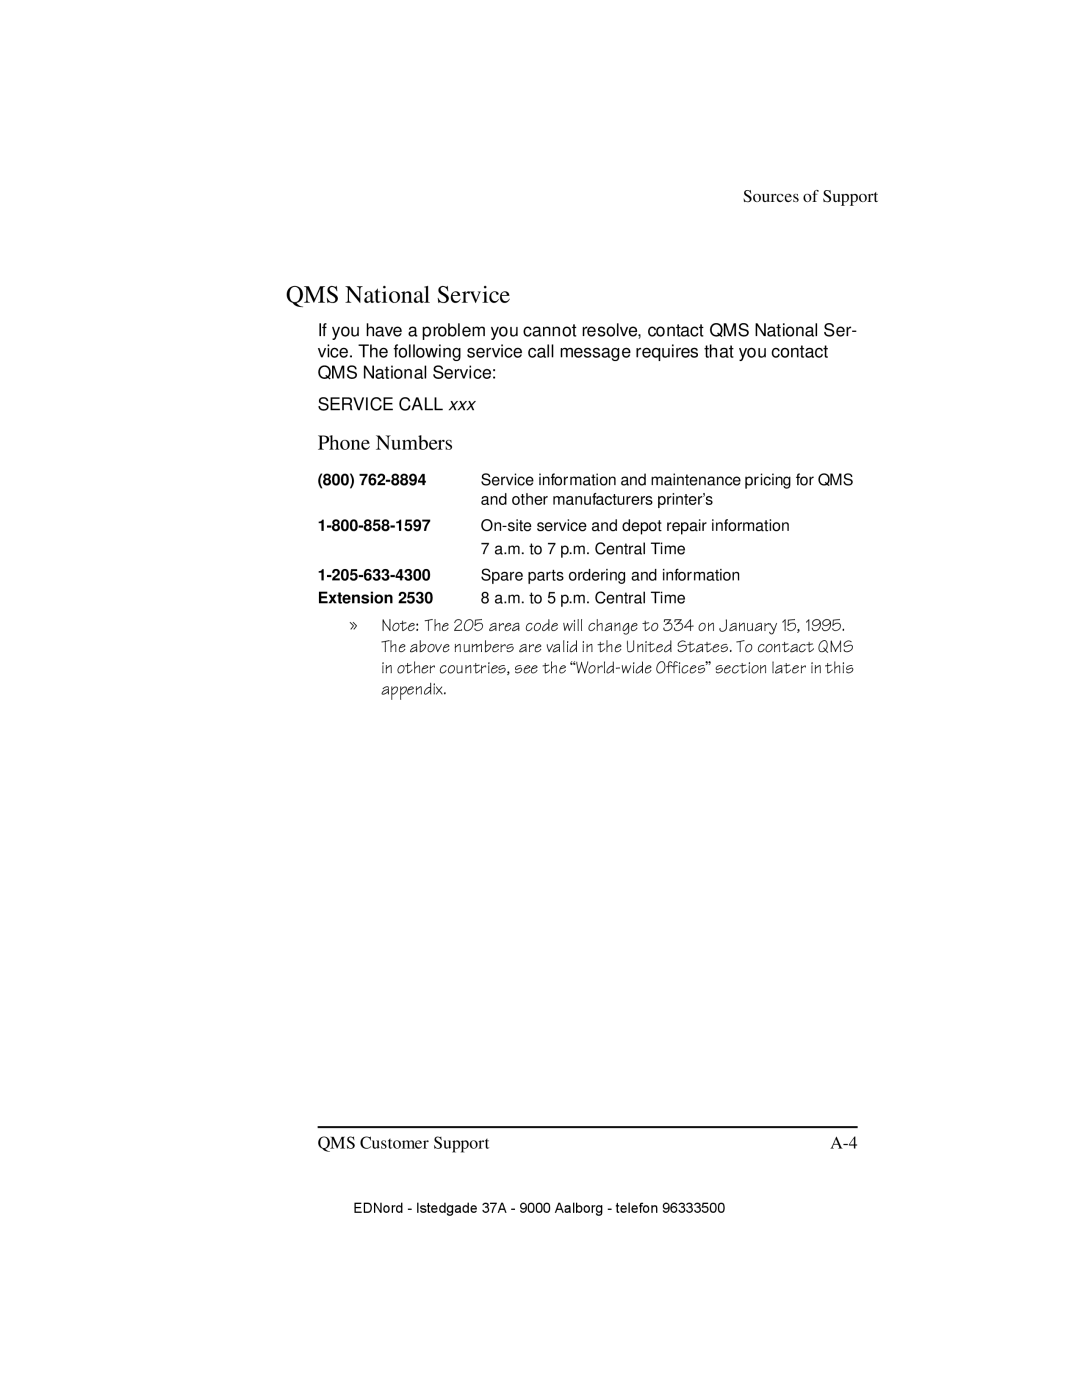 IBM QMS 4525 manual QMS National Service, Phone Numbers, Sources of Support, QMS Customer Support 